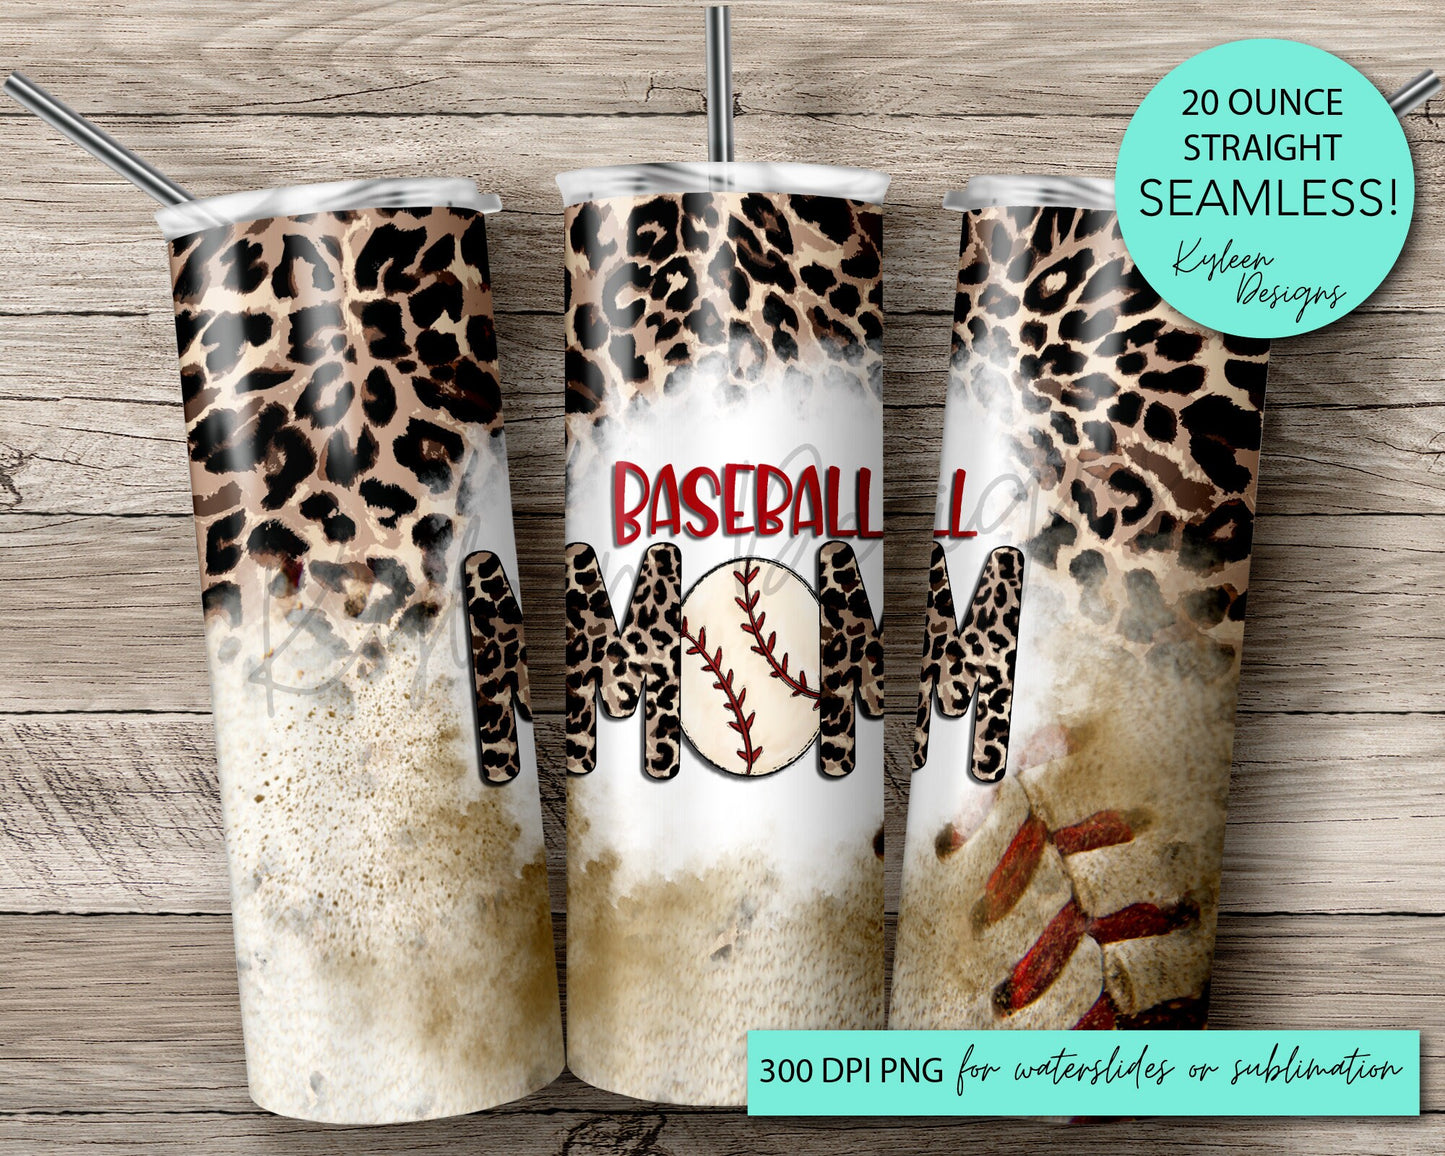 SEAMLESS Leopard Baseball mom 20 ounce tumbler wrap for sublimation, waterslide High res PNG digital file- Straight only